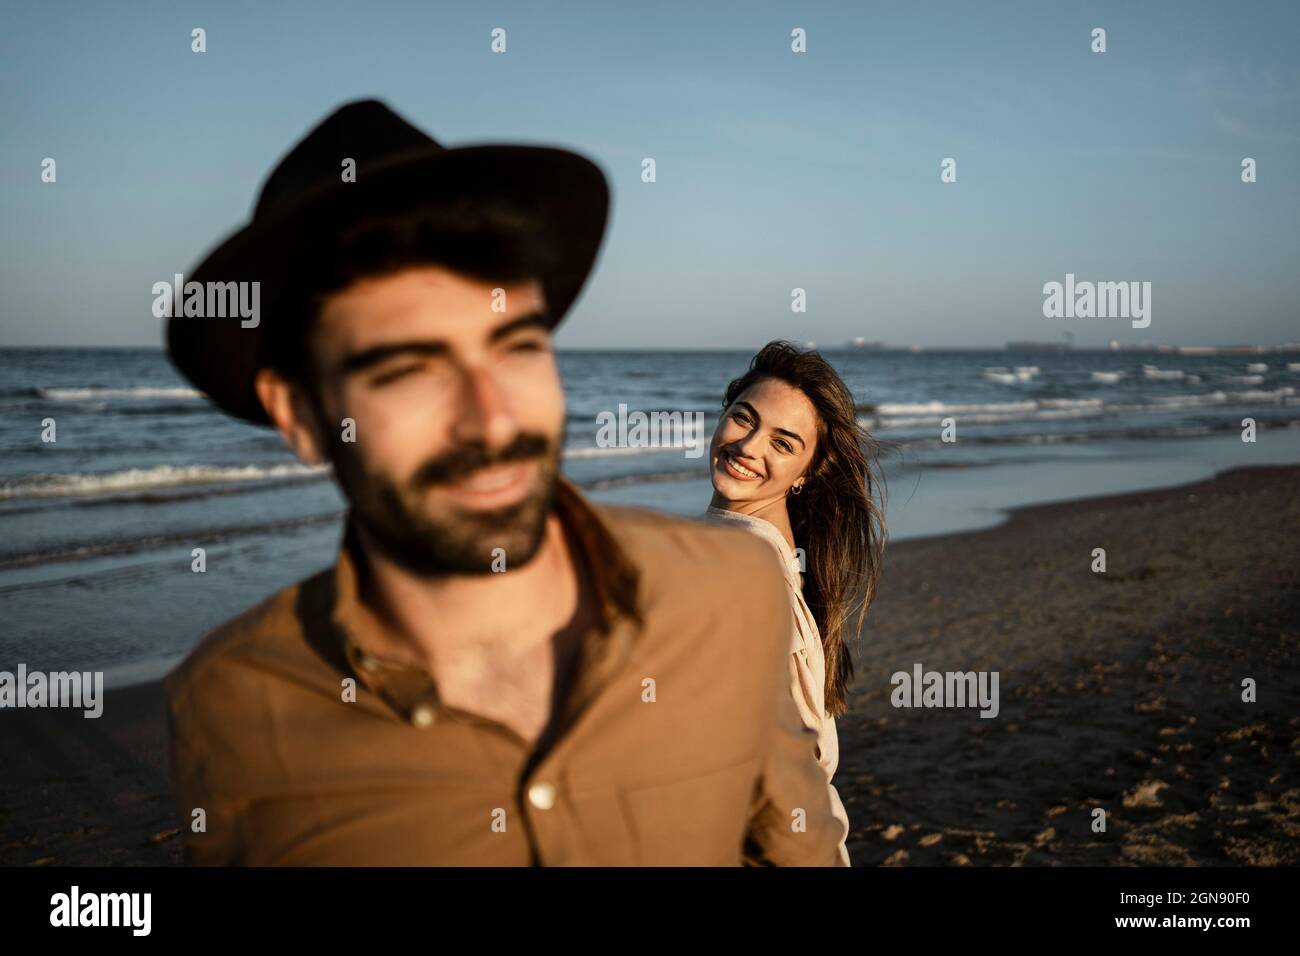 Girlfriend smiling while looking at boyfriend during sunset Stock Photo